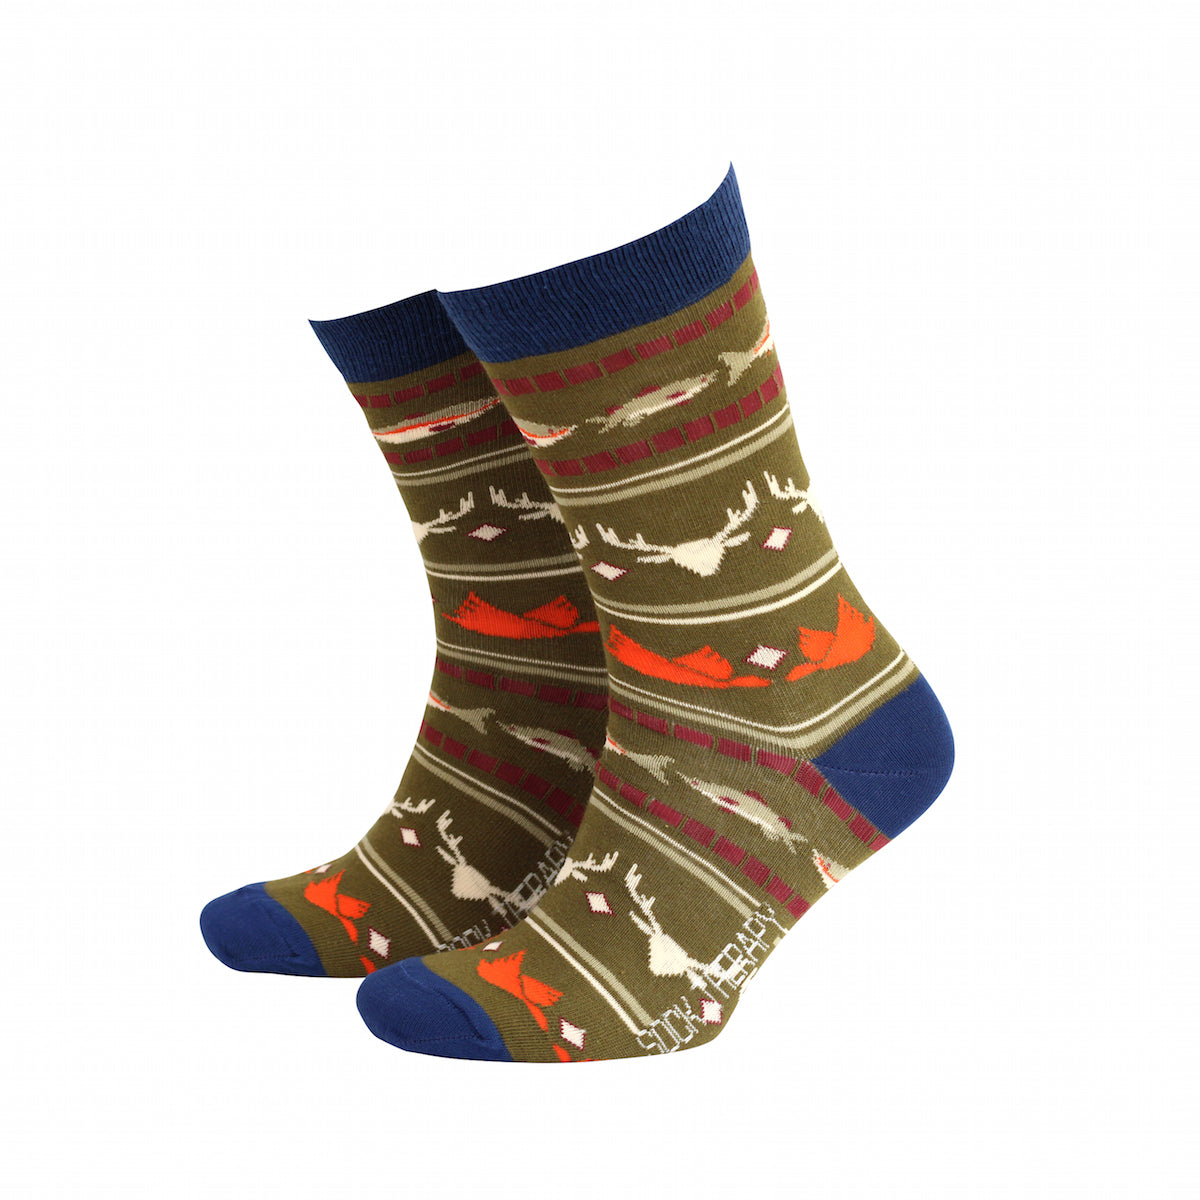 Country Pursuits socks